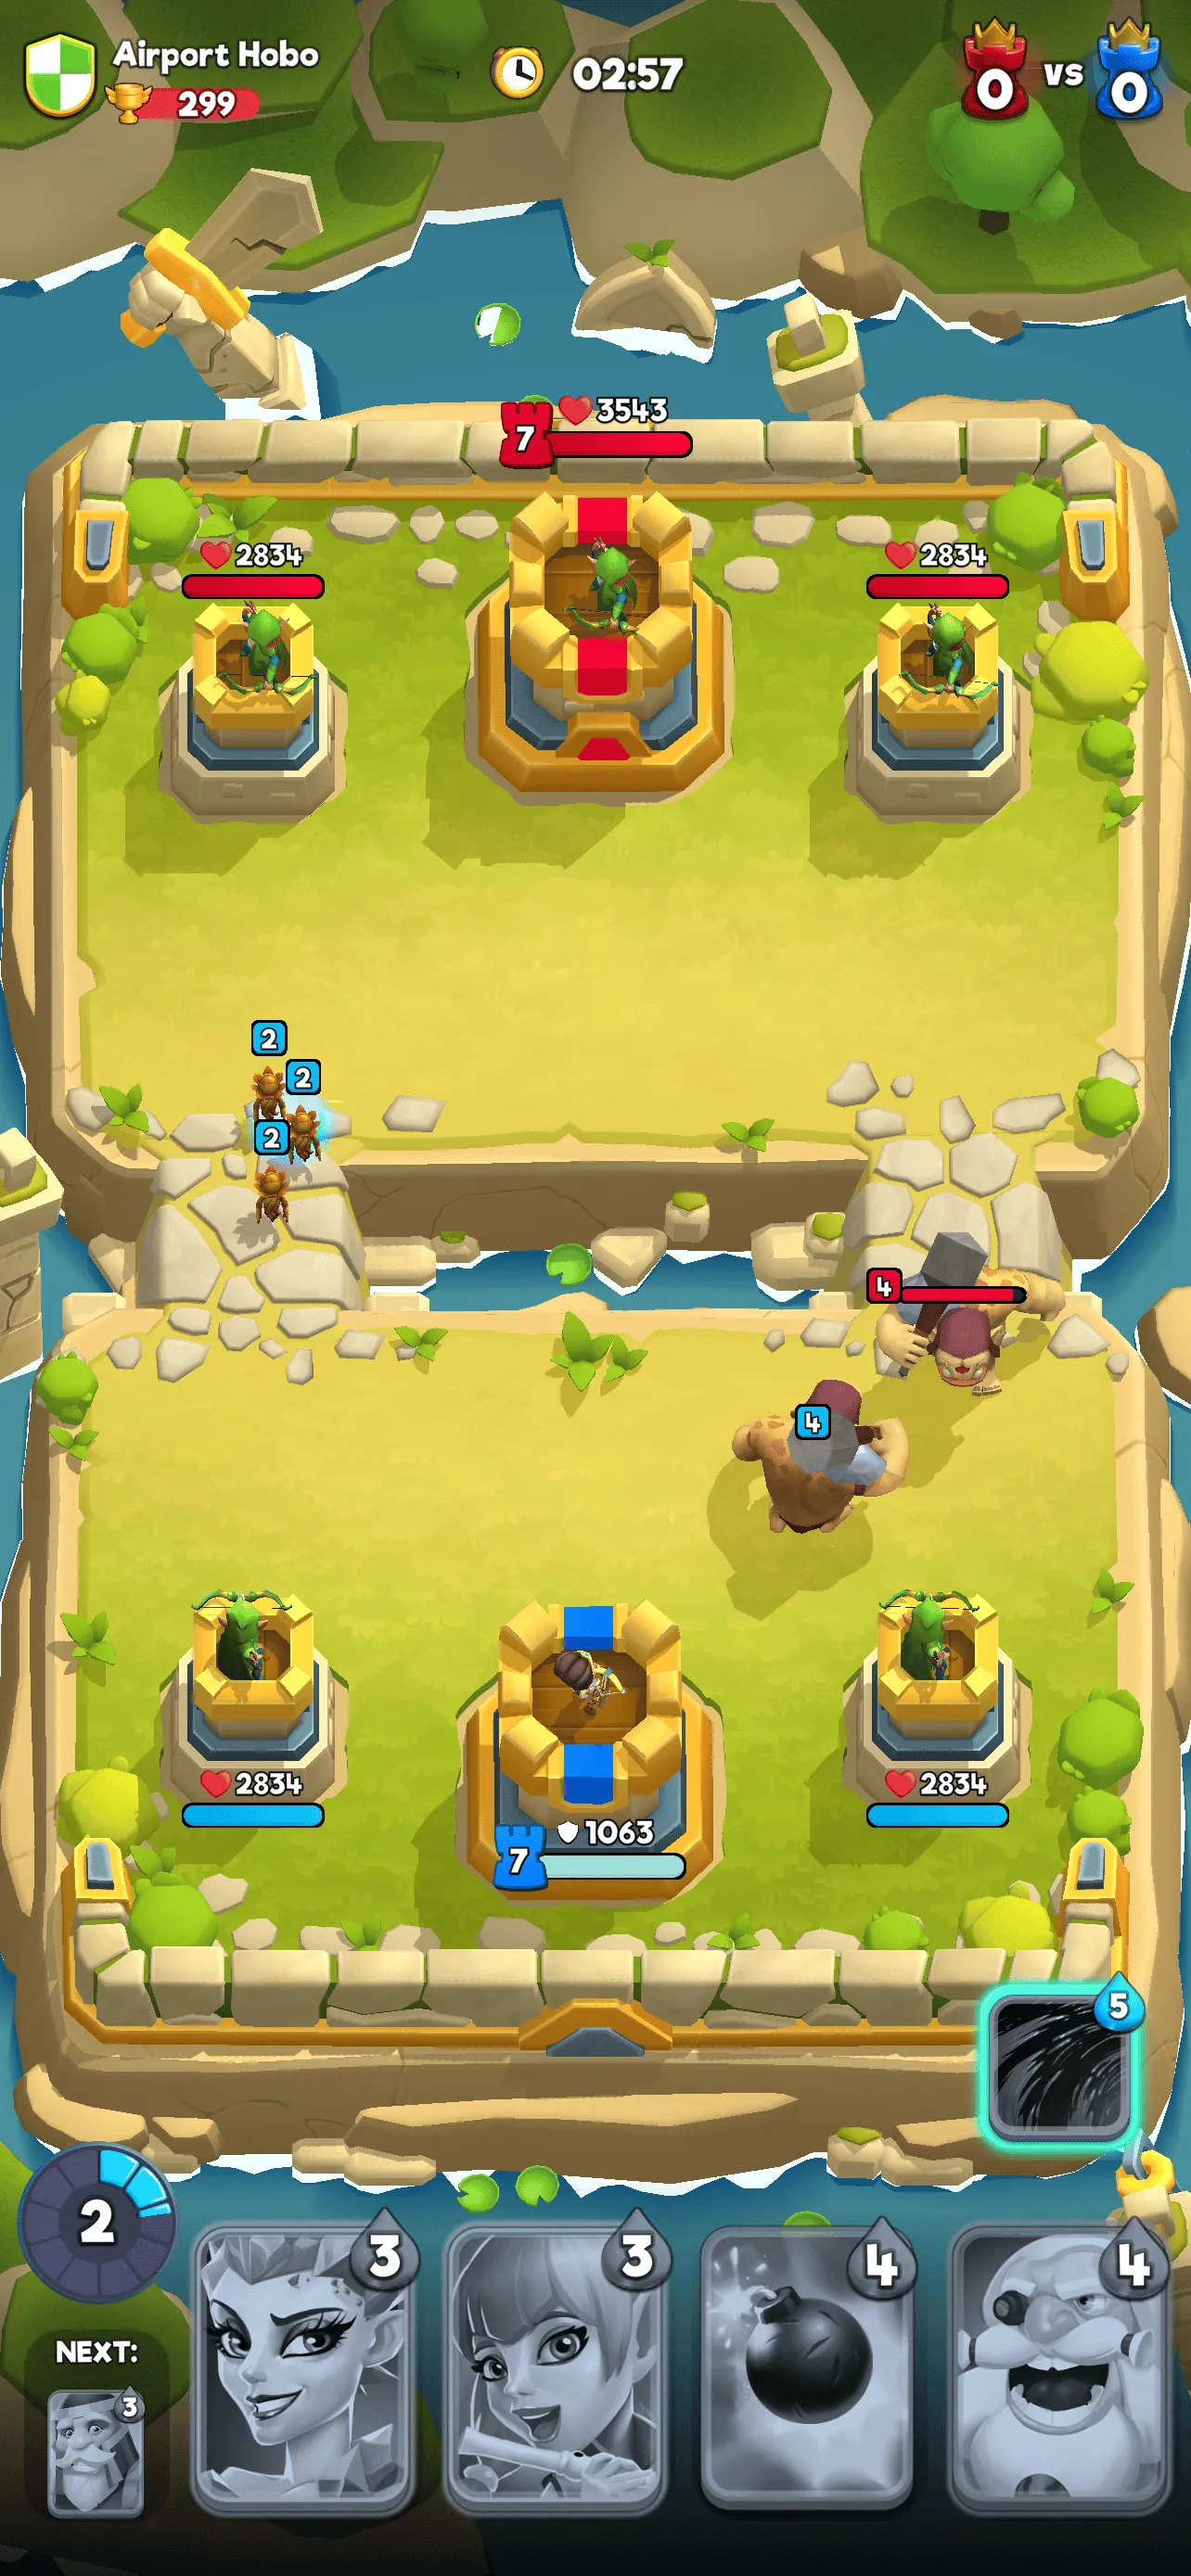 The image shows the gameplay of Age of Battles, where players must strategically deploy their battle deck of heroes to destroy their opponent's castle.